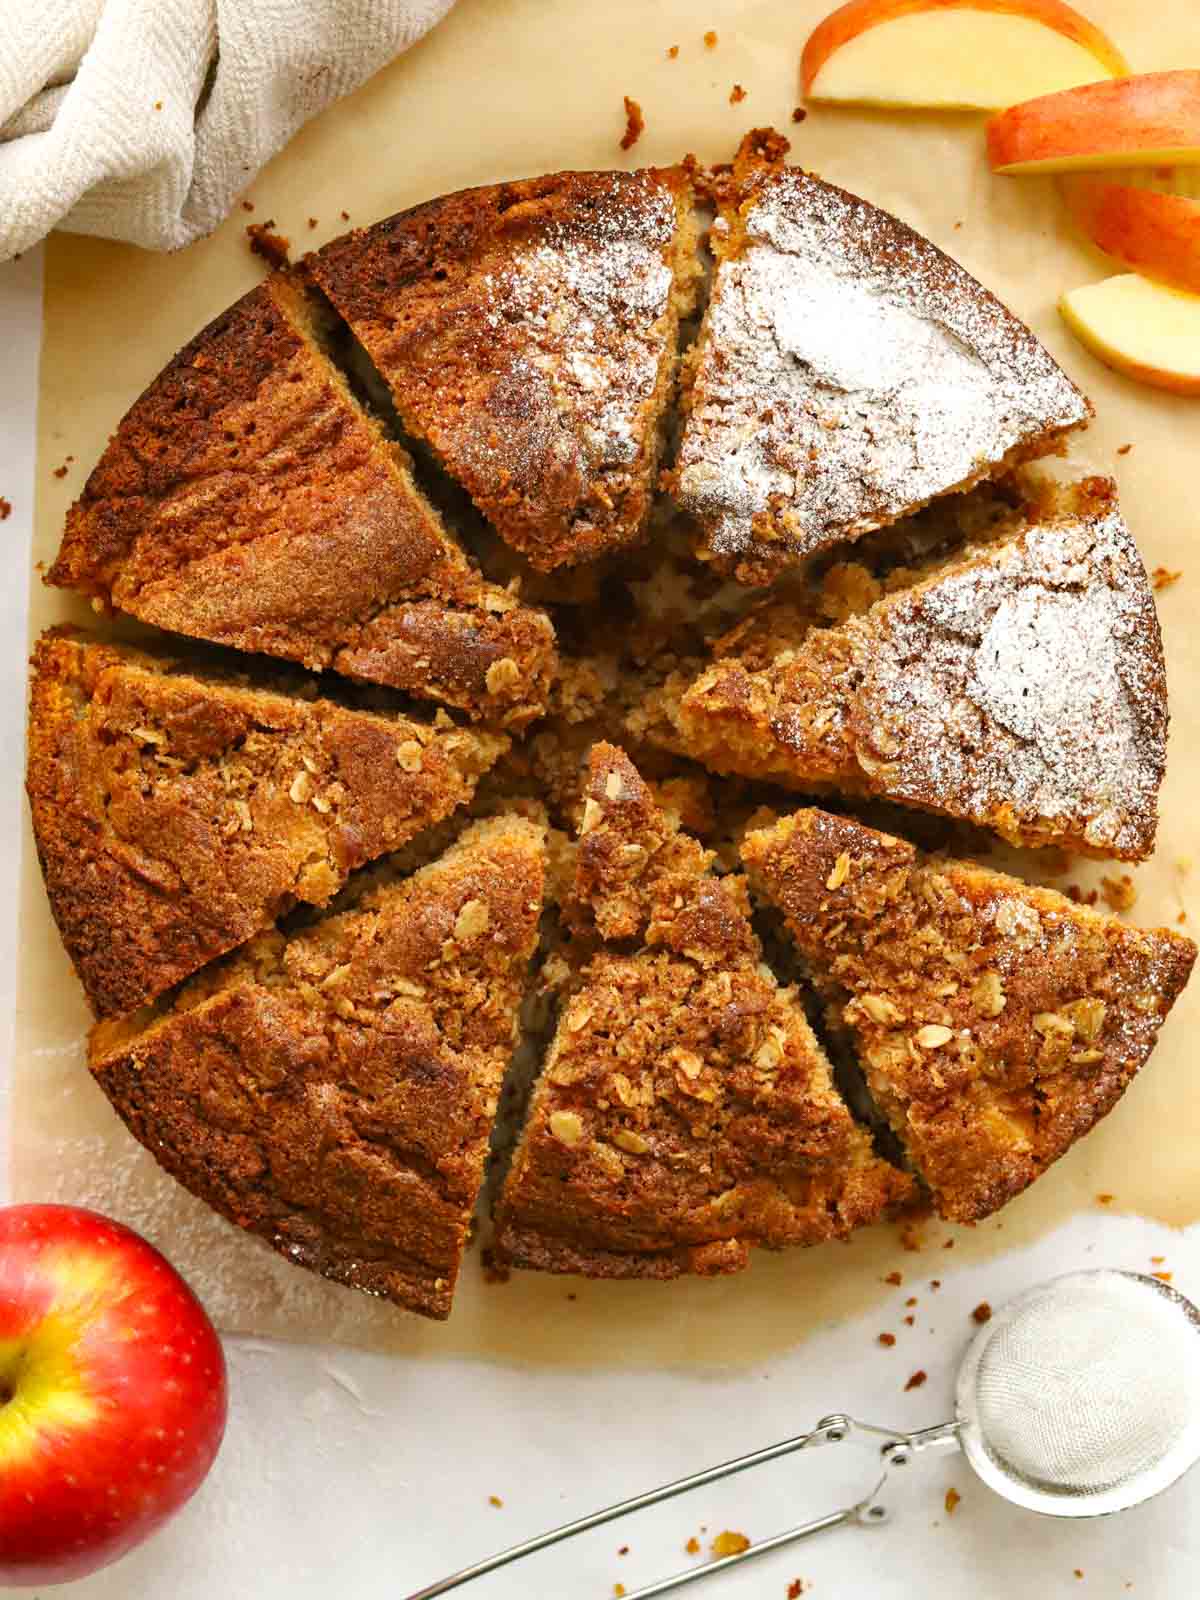 Slices of Cinnamon and Apple Cake on a table.